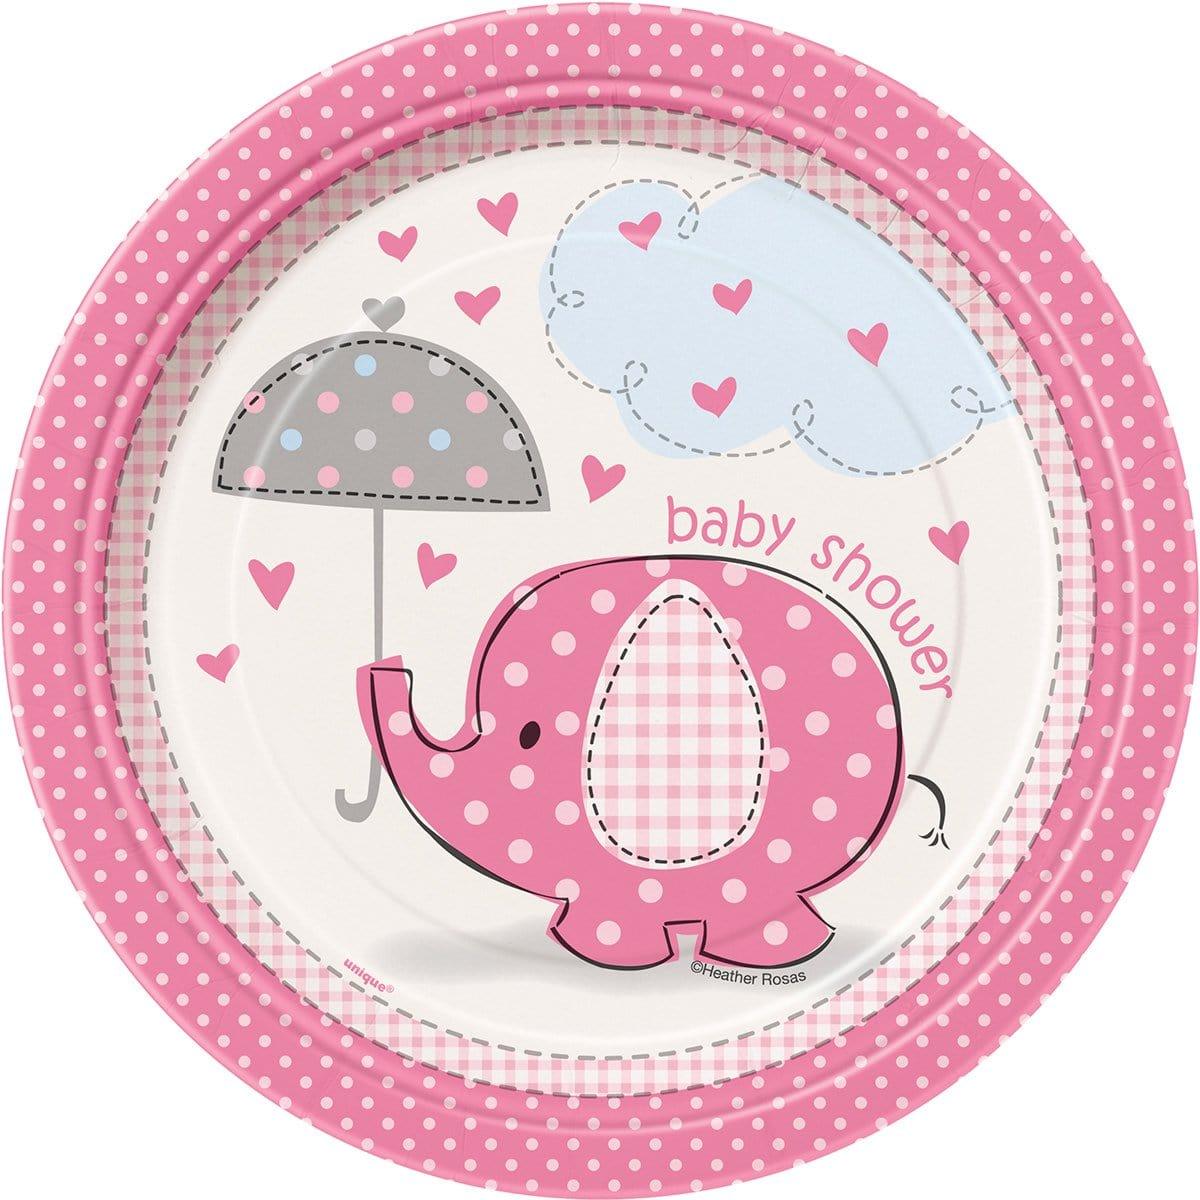 Buy Baby Shower Umbrellaphants Pink paper plates 7 inches, 8 per package sold at Party Expert